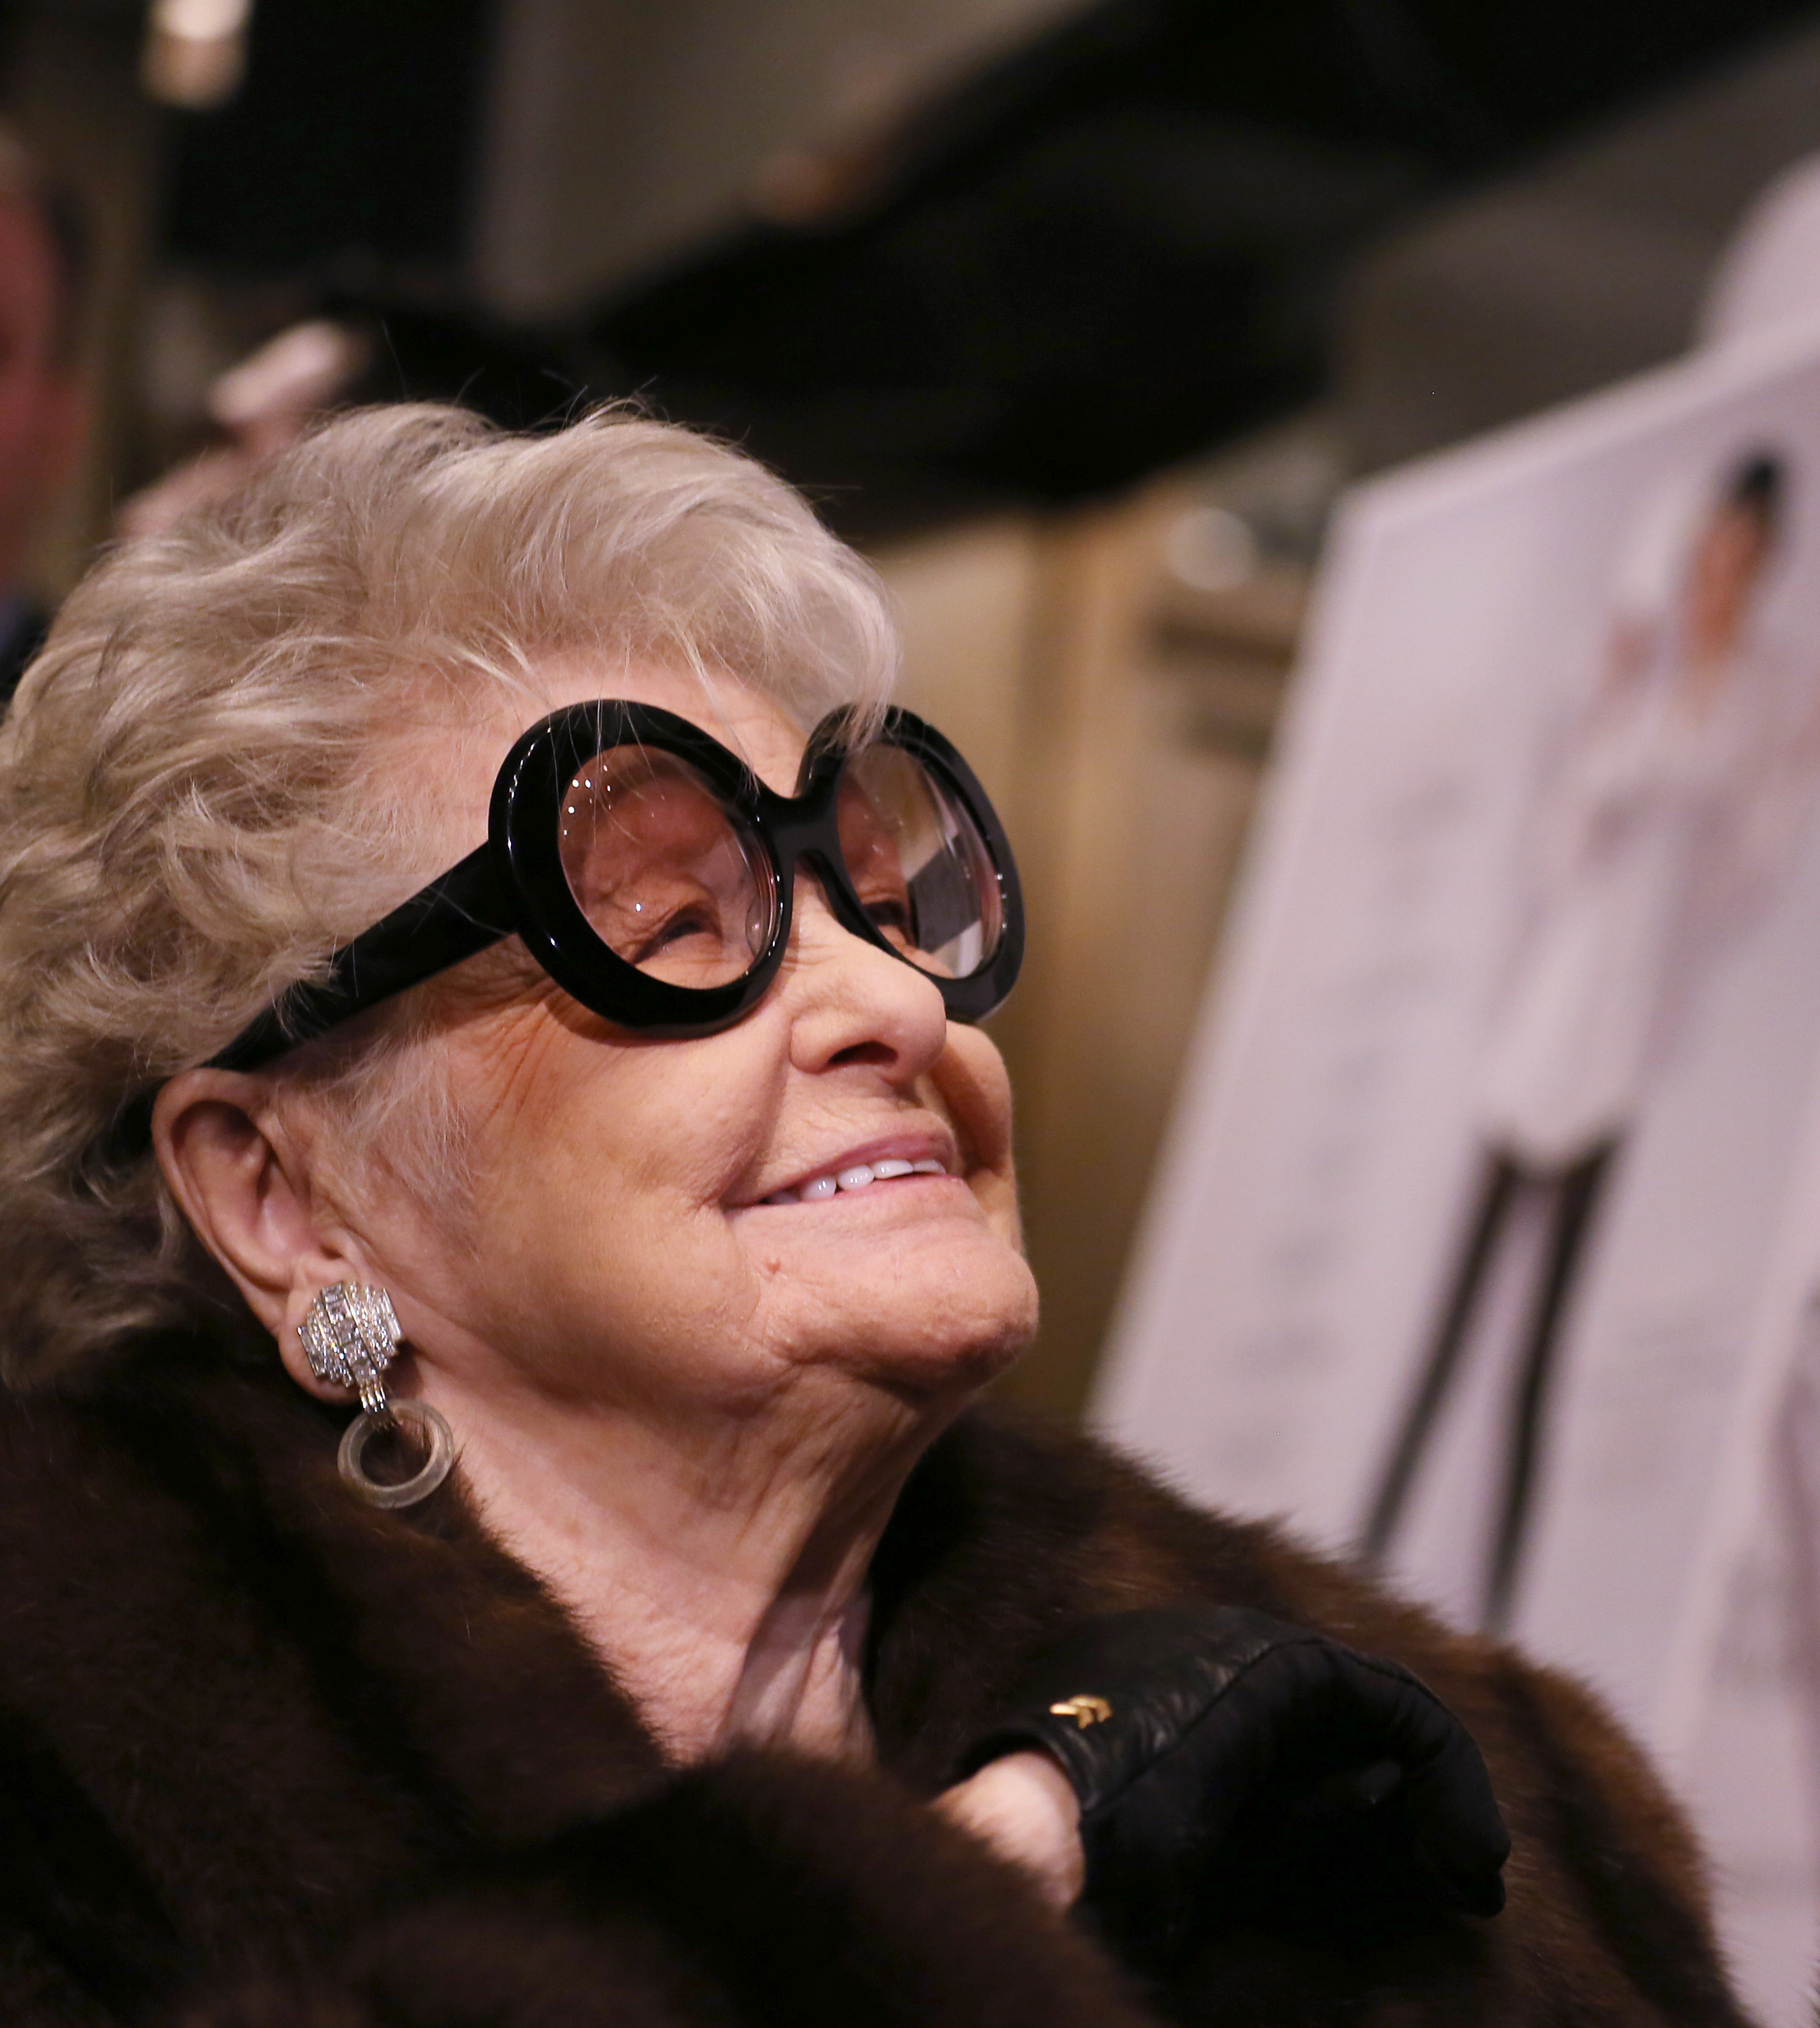 Elaine Stritch attends the "Elaine Stritch: Shoot Me" New York Screening at Paley Center For Media on February 19, 2014 in New York City.